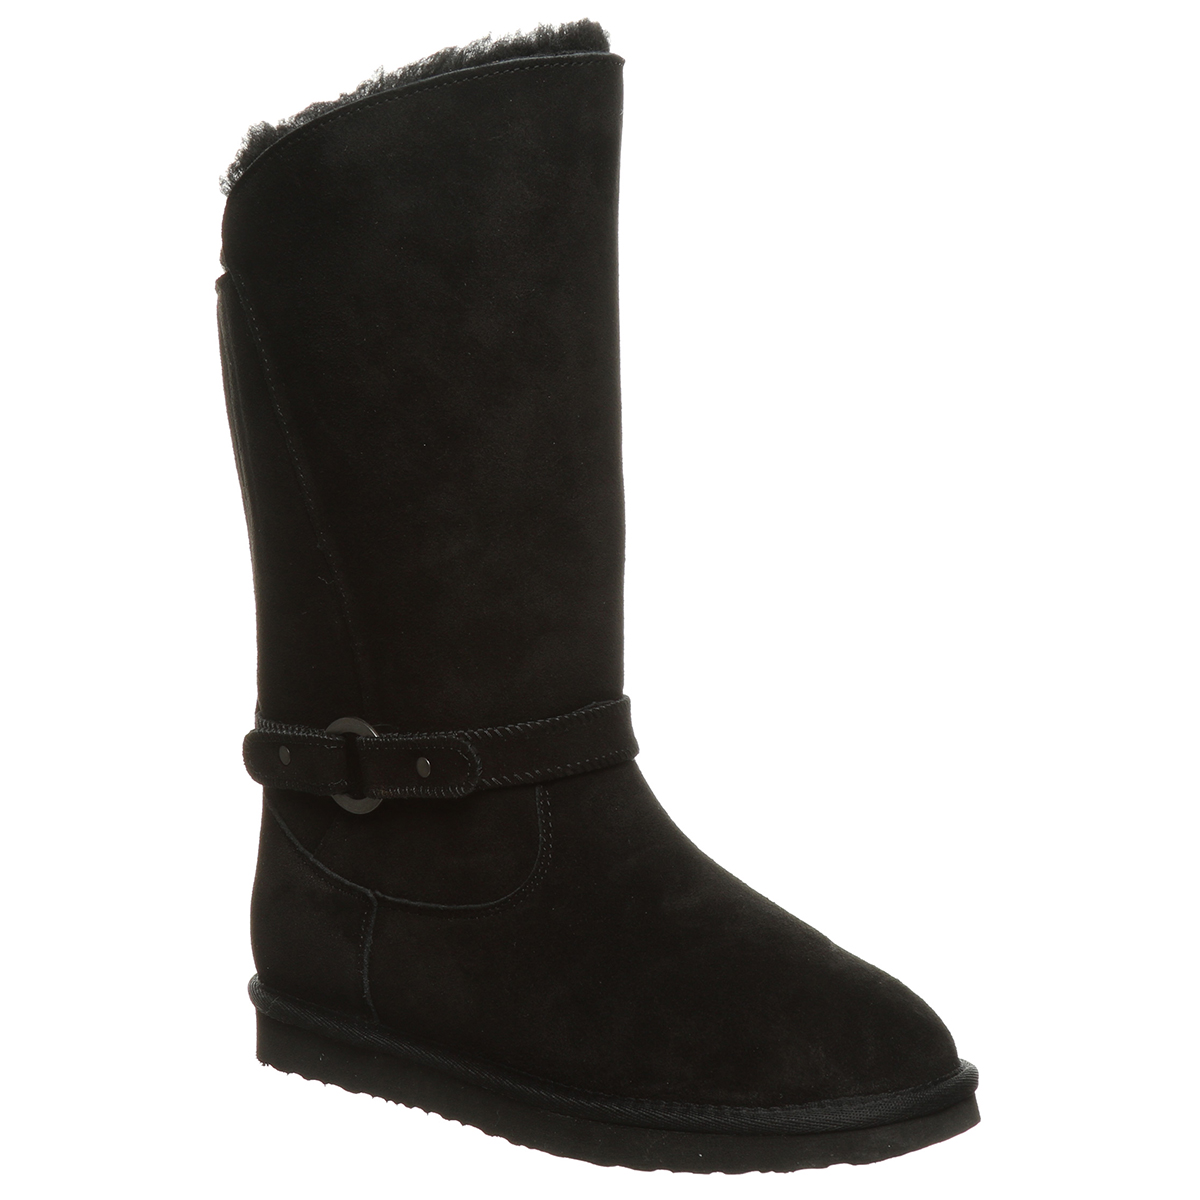 Pawz By Bearpaws Women's Presely Shearling Boot - Size 10